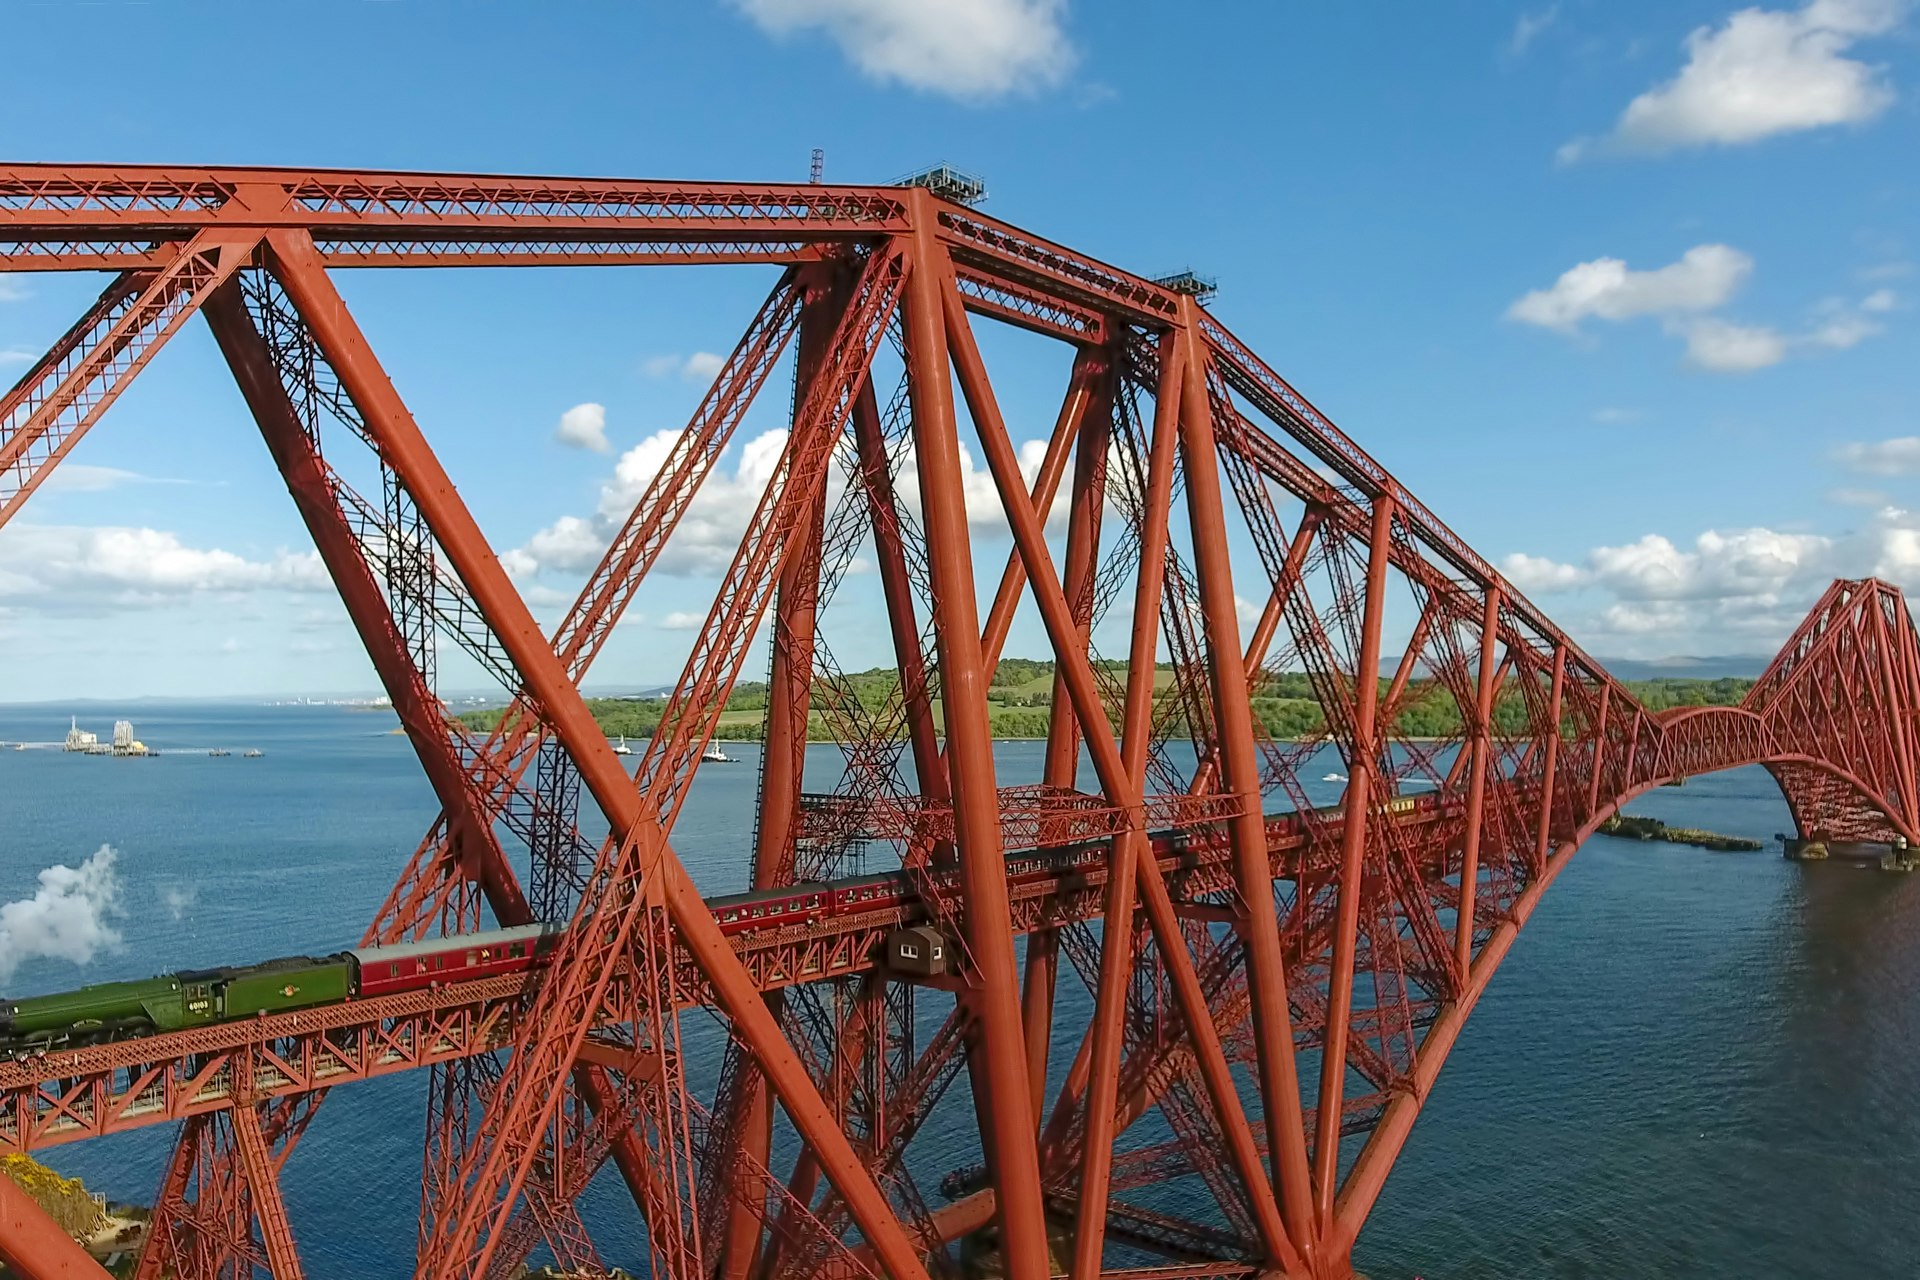 The Flying Scotsman passes over the Forth Rail Bridge to North Queens Ferry, the Kingdom of Fife.